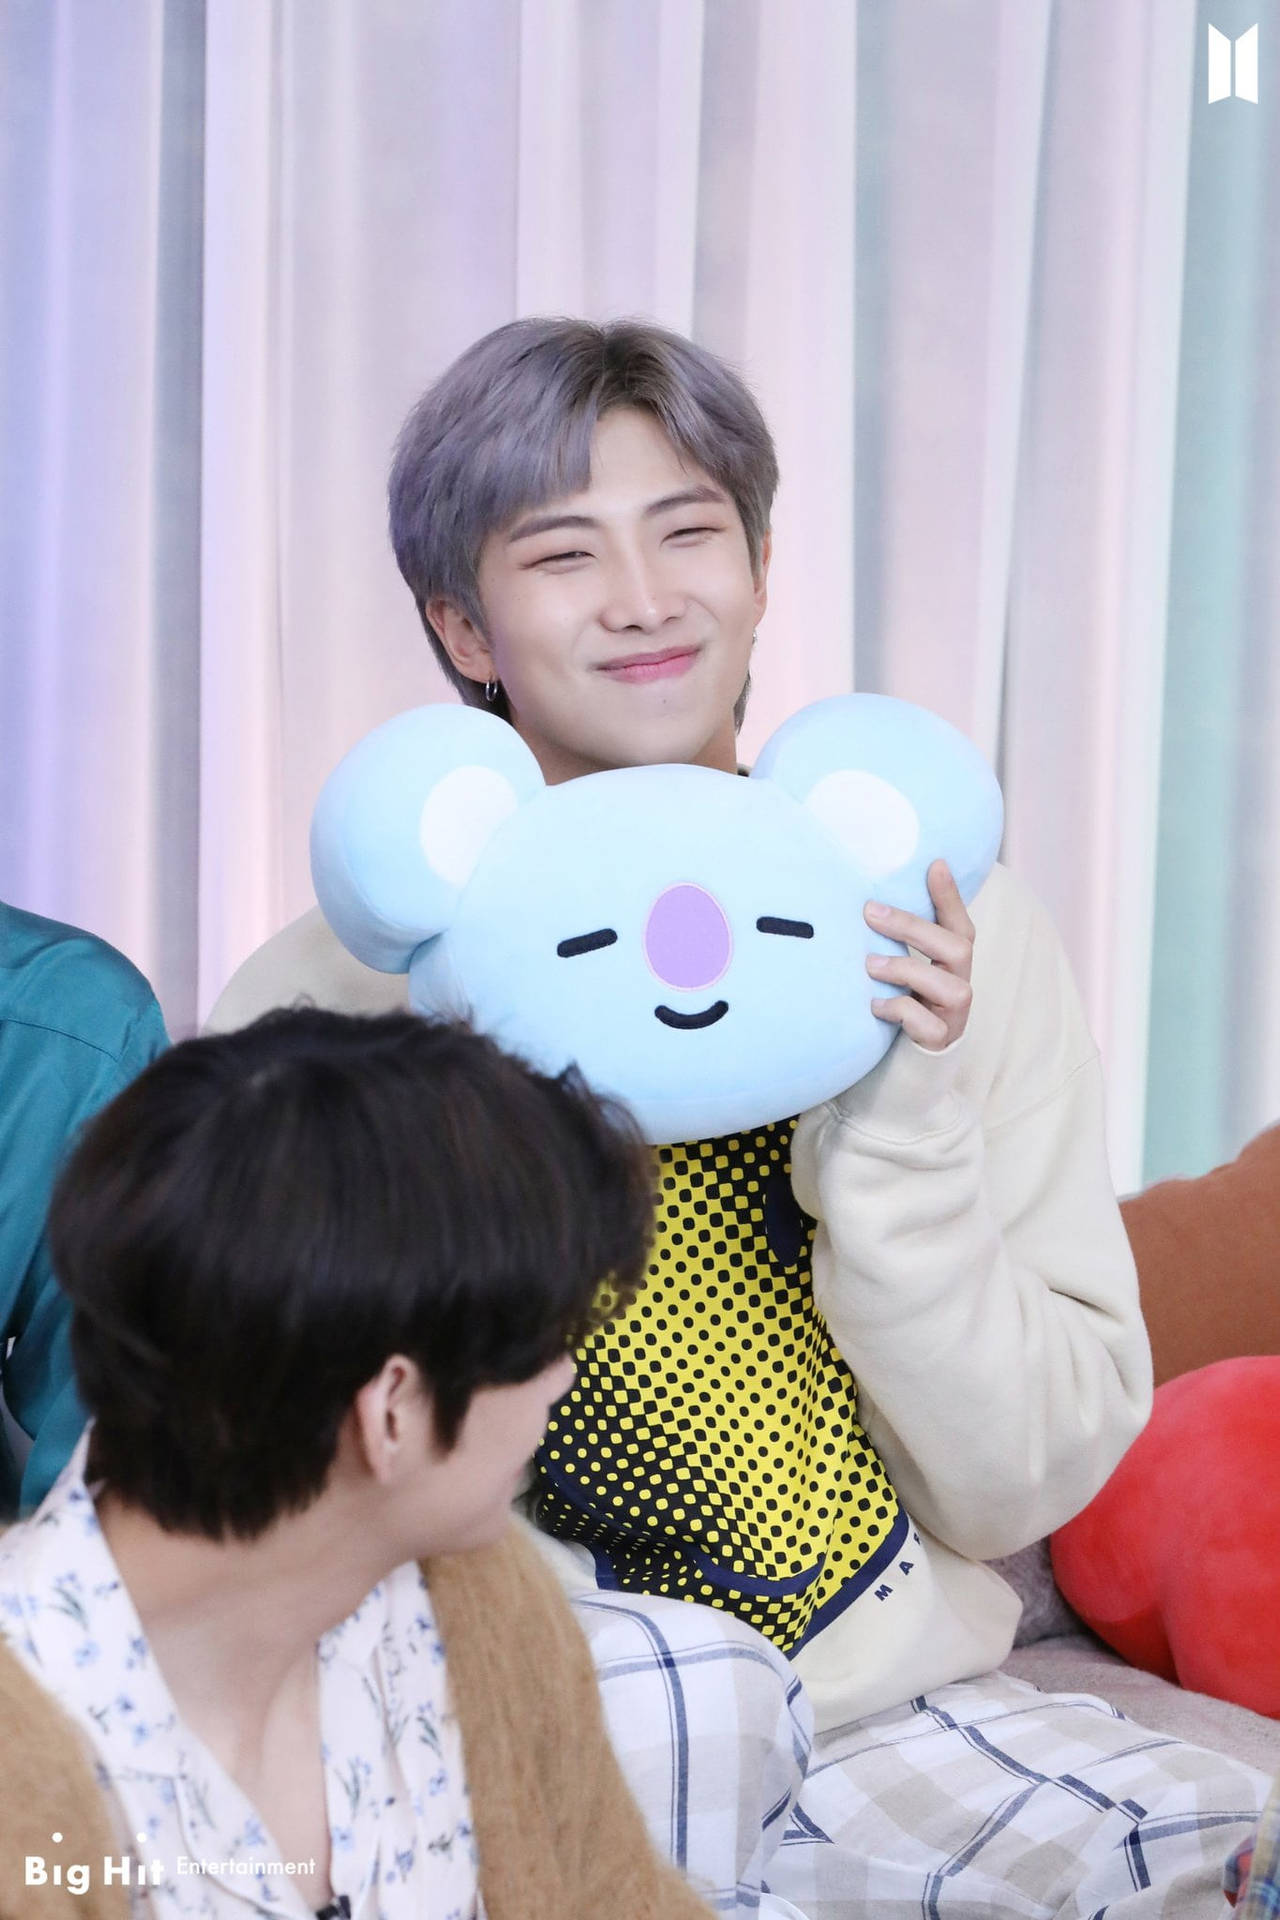 Caption: Adorable Rm Plush Toy Inspired By Bts Band Member Background